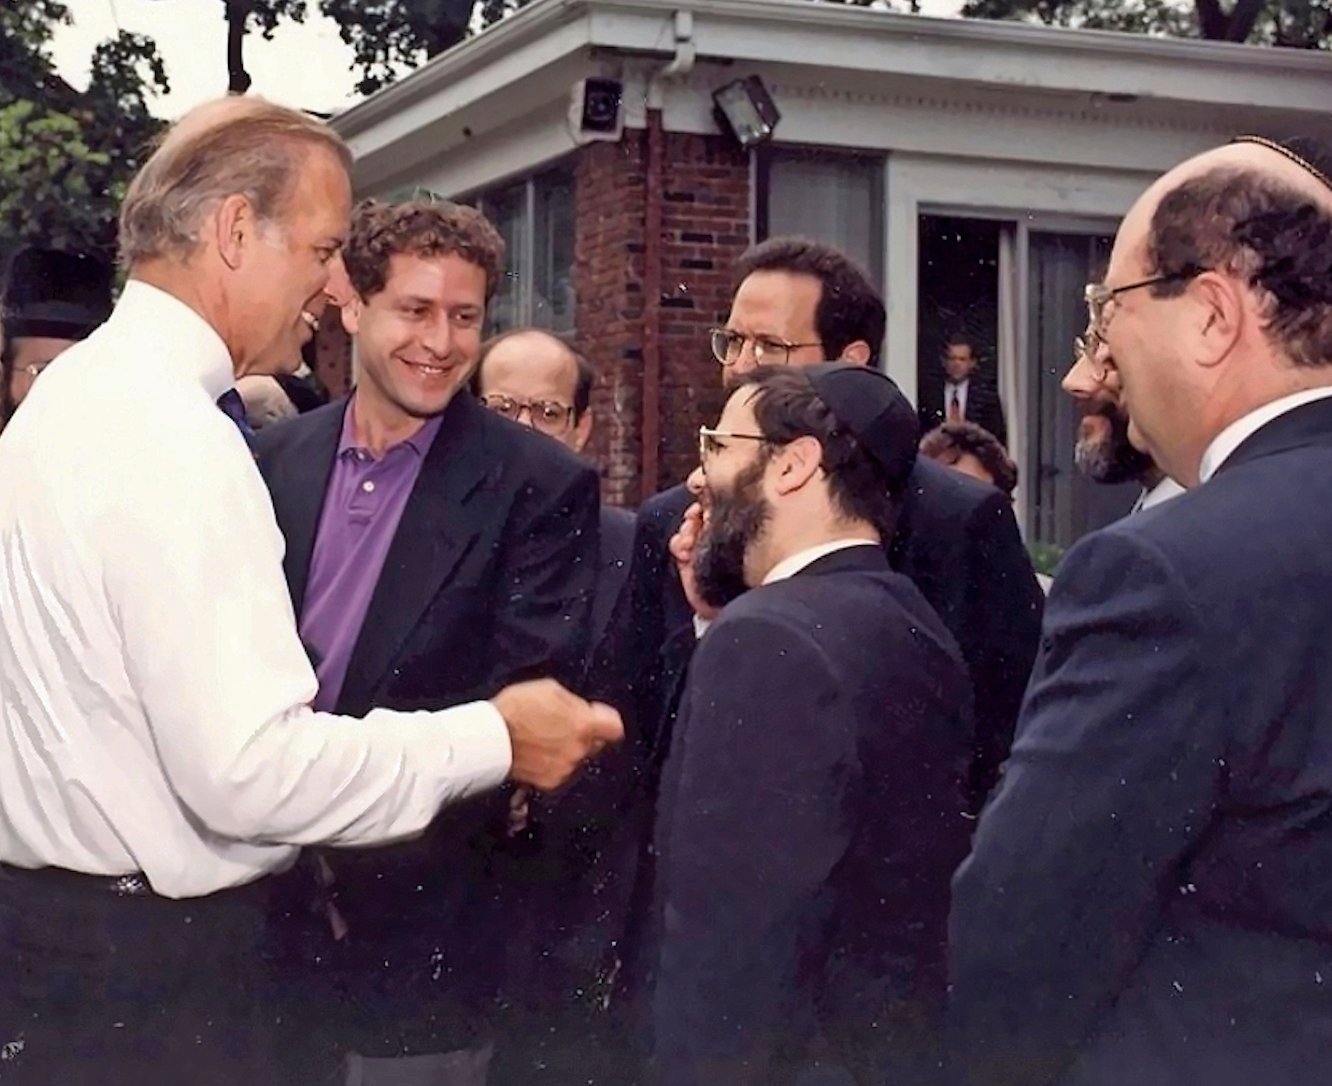 BIDEN IN THE FIVE TOWNS: In 1994, Joe Biden addressed the graduation ceremony of the Yeshiva of South Shore in Hewlett, then attended a fundraiser (above) at the Lawrence home of Martin and Reva Oliner. At the time, Biden, who was inaugurated as America’s 46th president on Wednesday, was chairman of the Senate Judiciary Committee.